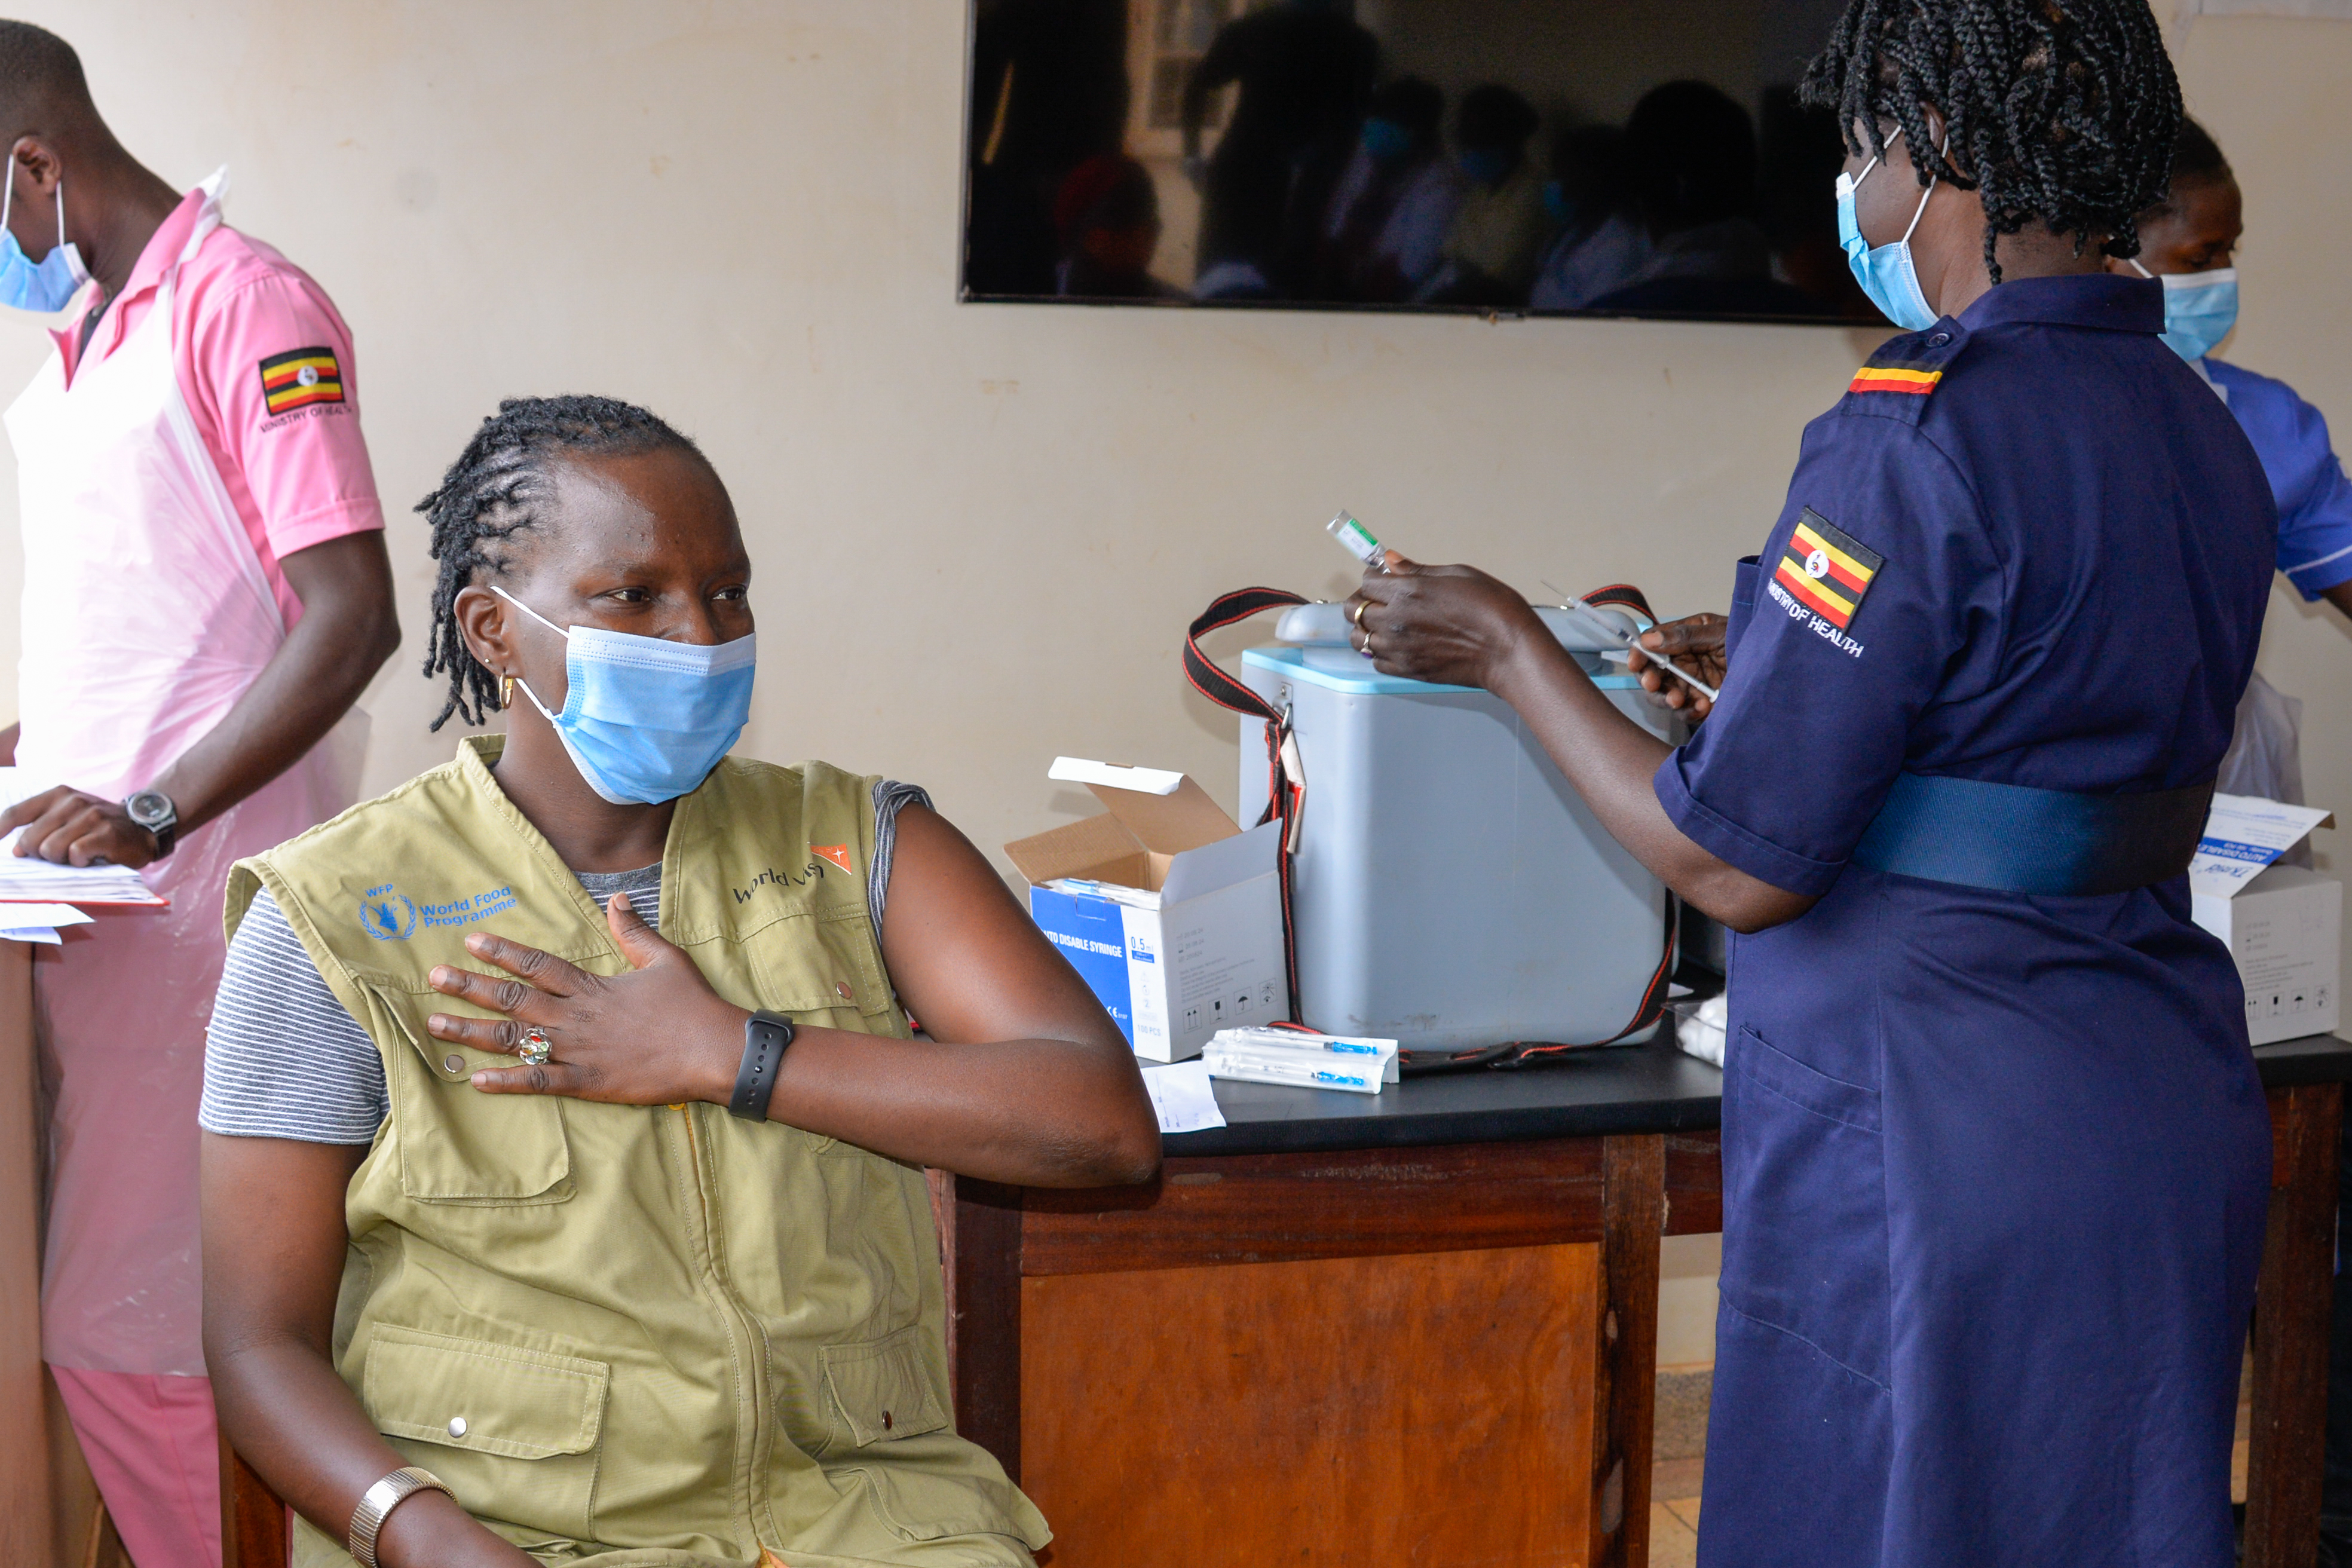 On 30th April, Over 20 World Vision Uganda staff in the Refugee Response took their first dose of the COVID-19 Vaccine in Yumbe, Northern Uganda.